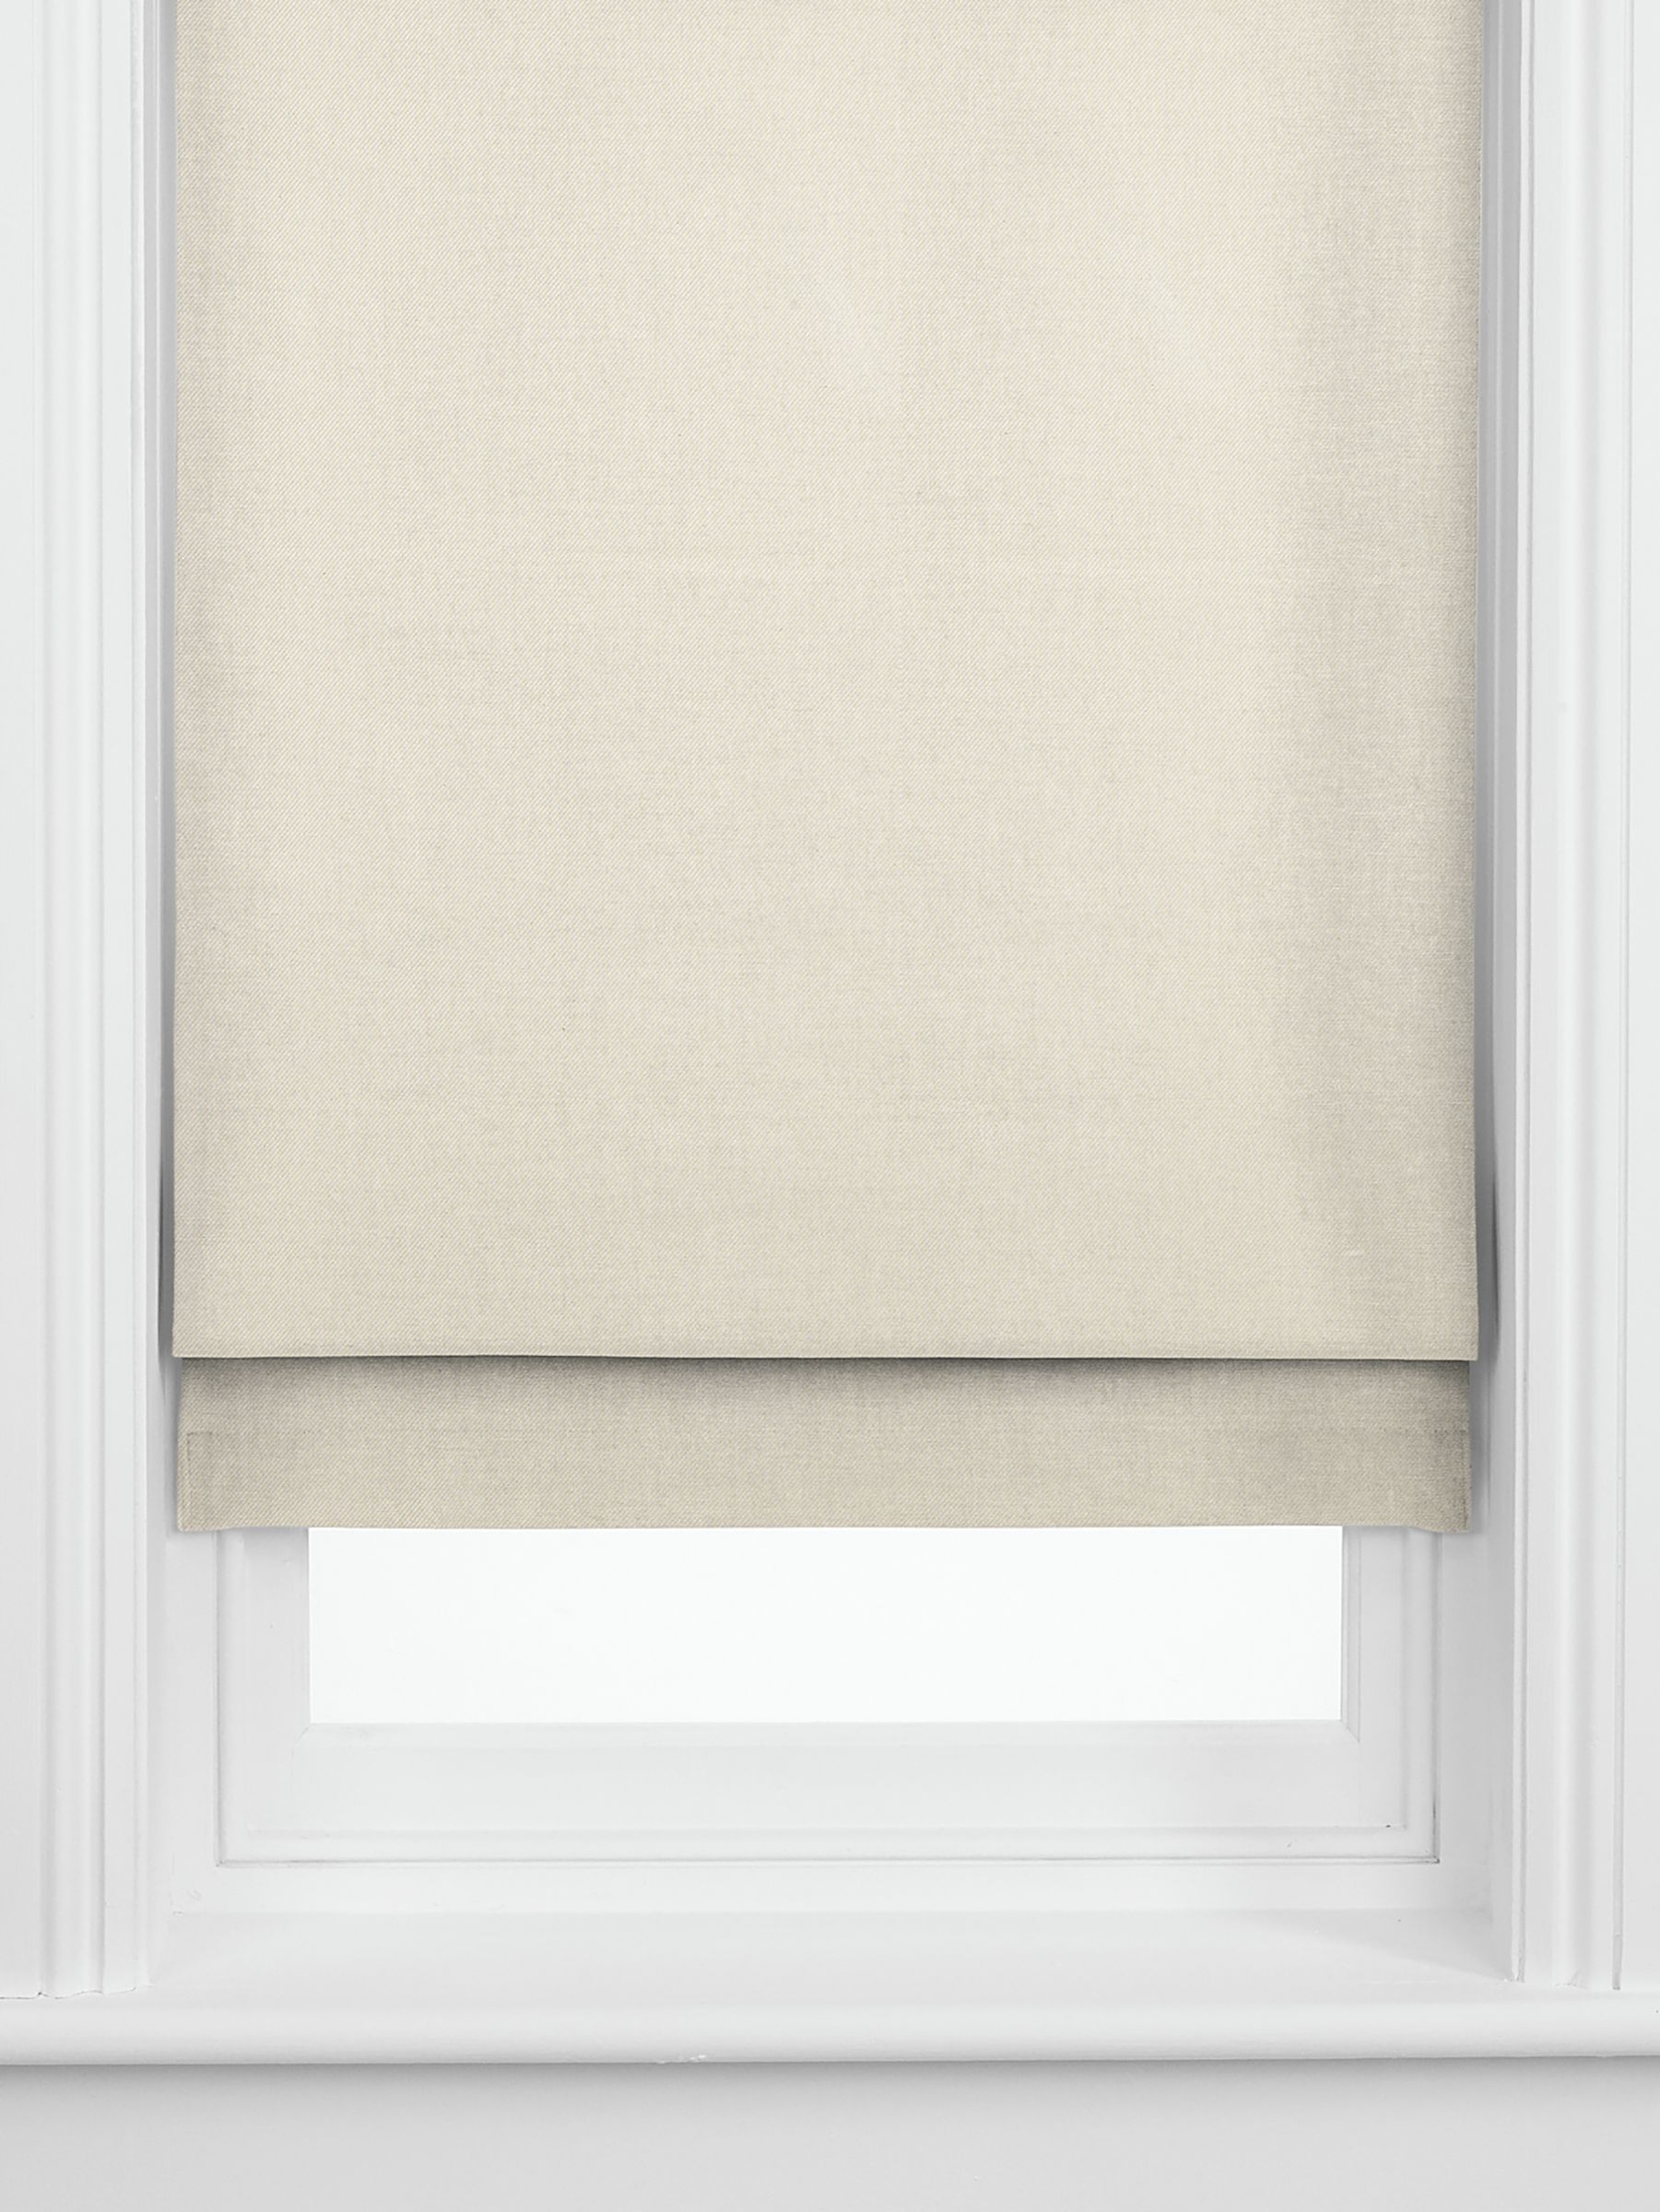 John Lewis Cotton Twill Made to Measure Curtains, Oatmeal